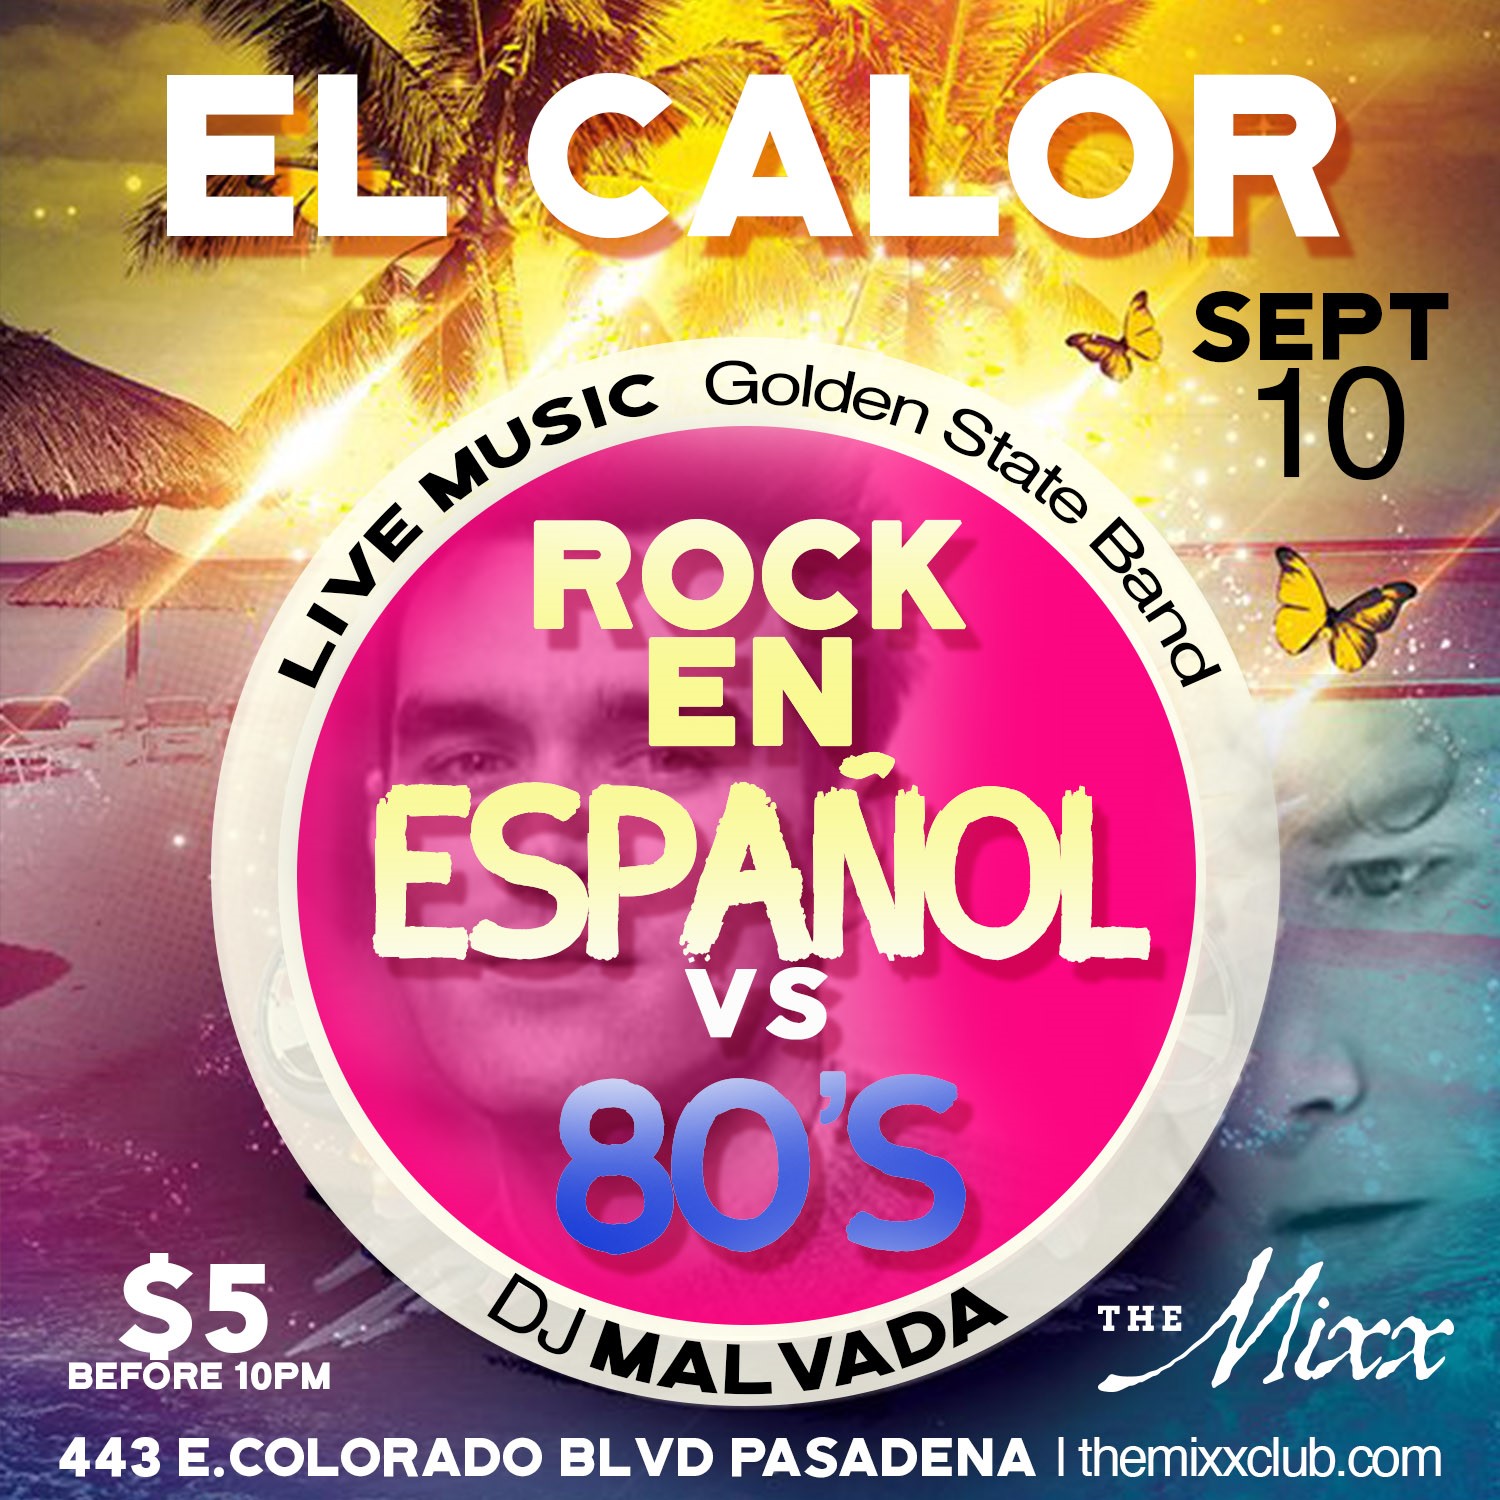 You are currently viewing Live Rock En Español vs 80s